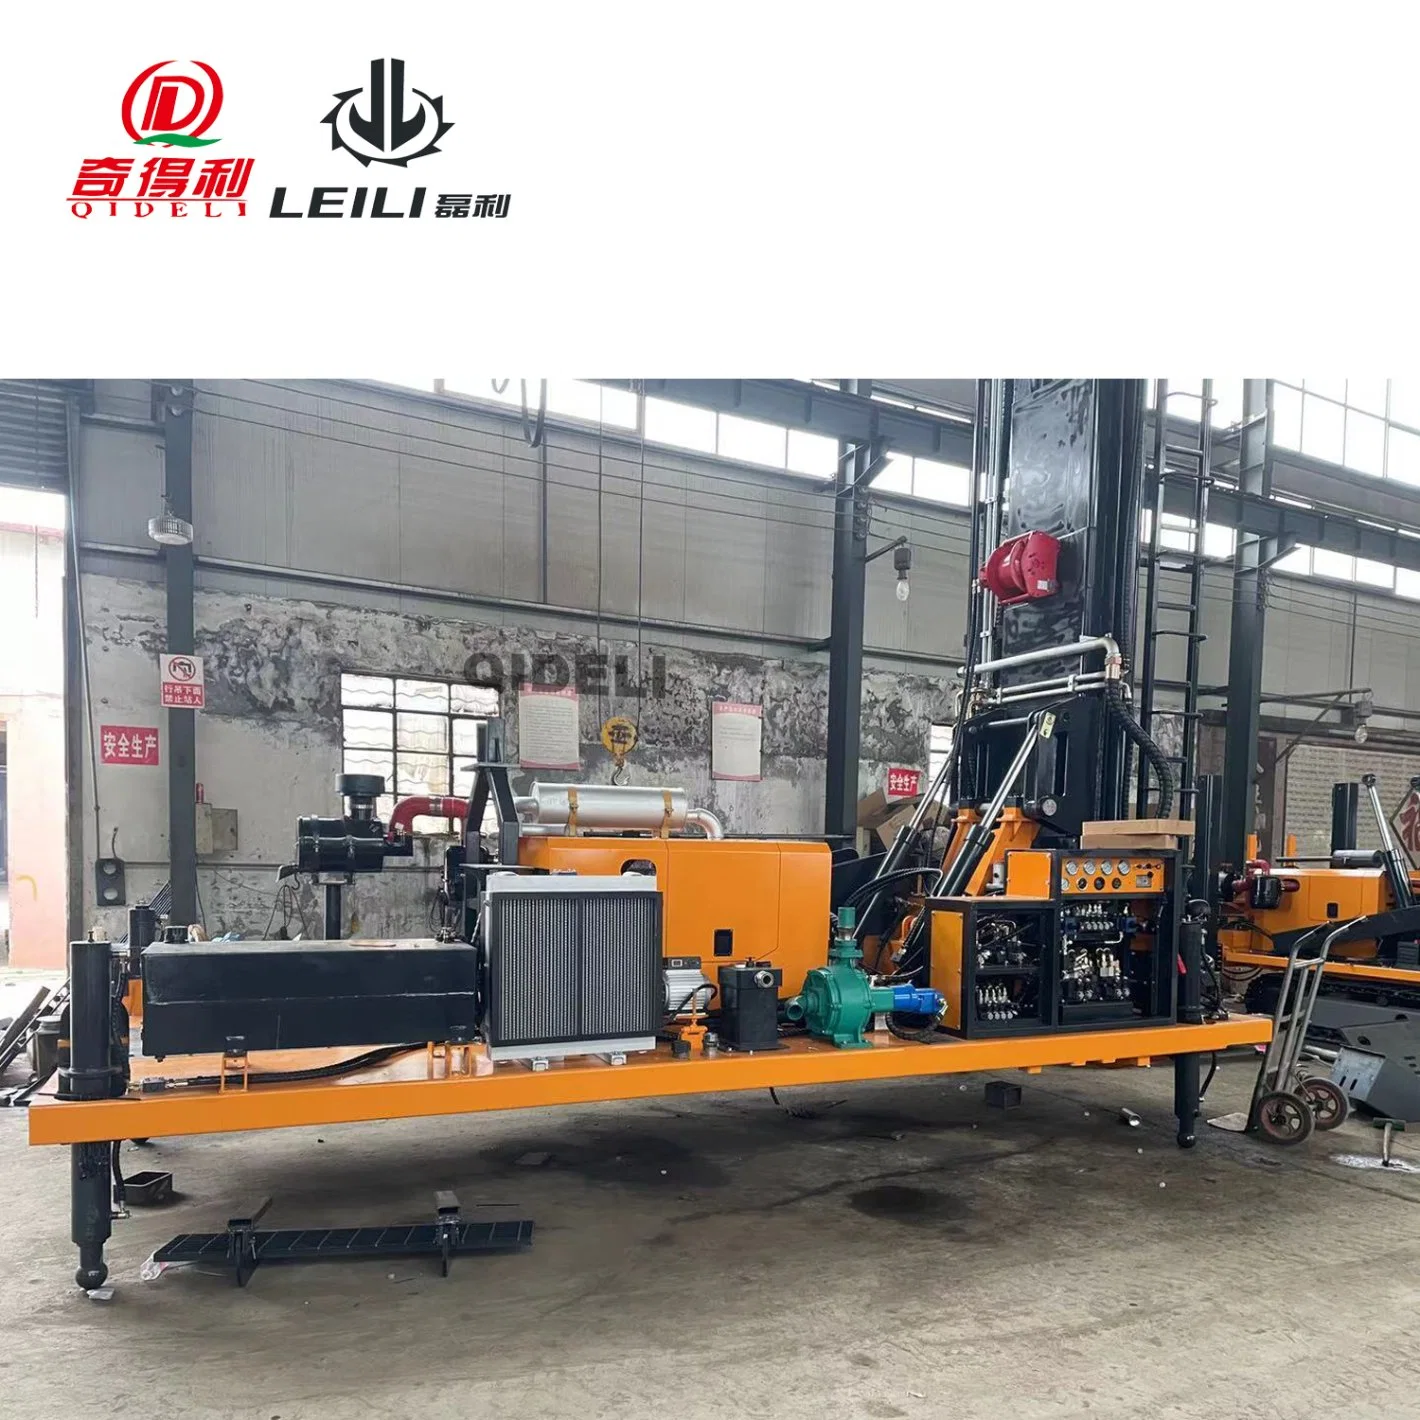 Rock Bore Hole Drilling Machine Water Well Drilling Rigs Qdl-130